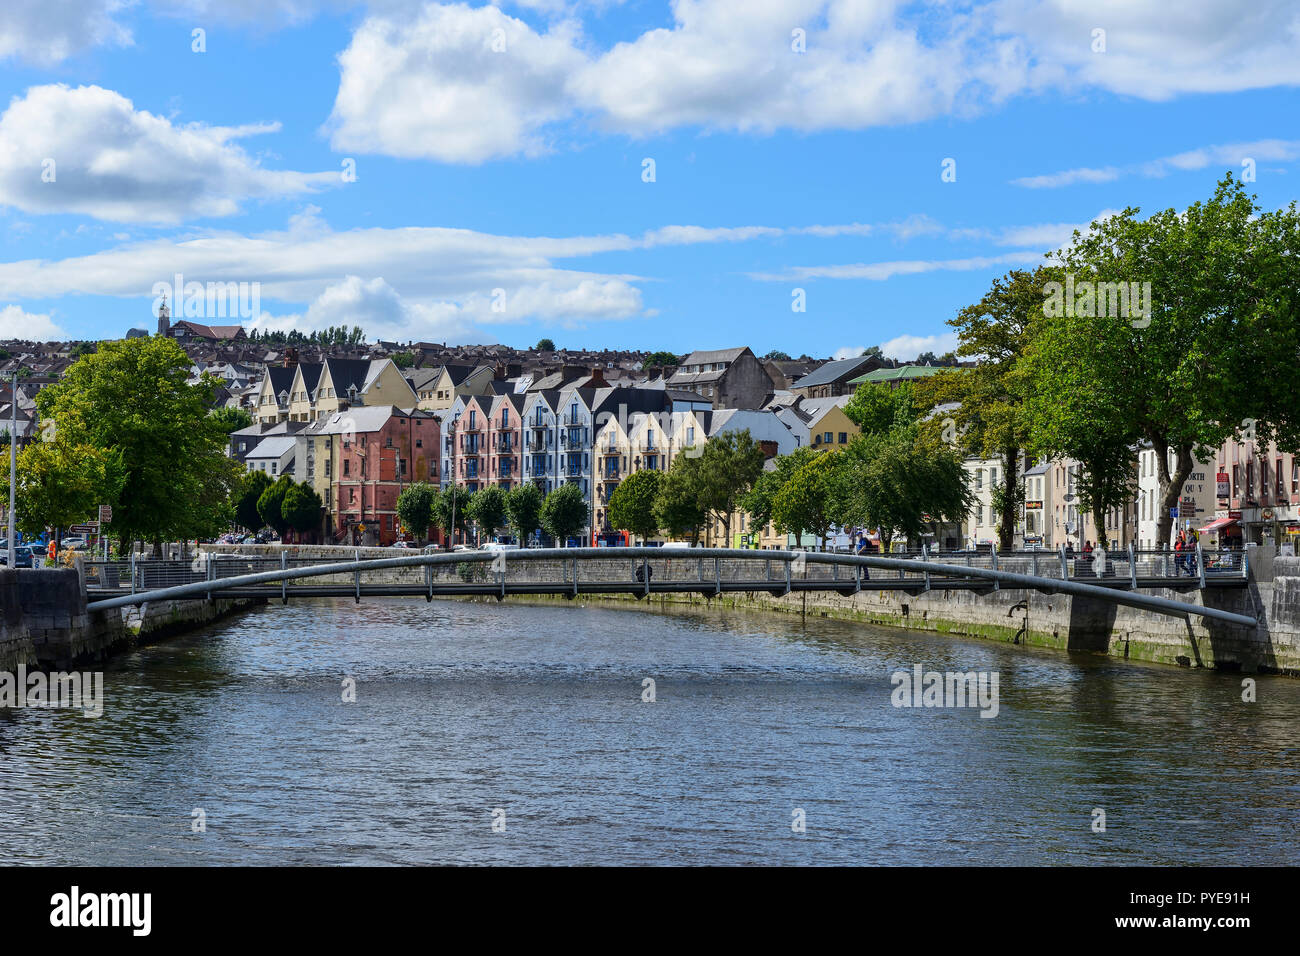 Pedestrian footbridge across River Lee with colourful building on Popes Quay in background, Cork, County Cork, Republic of Ireland Stock Photo